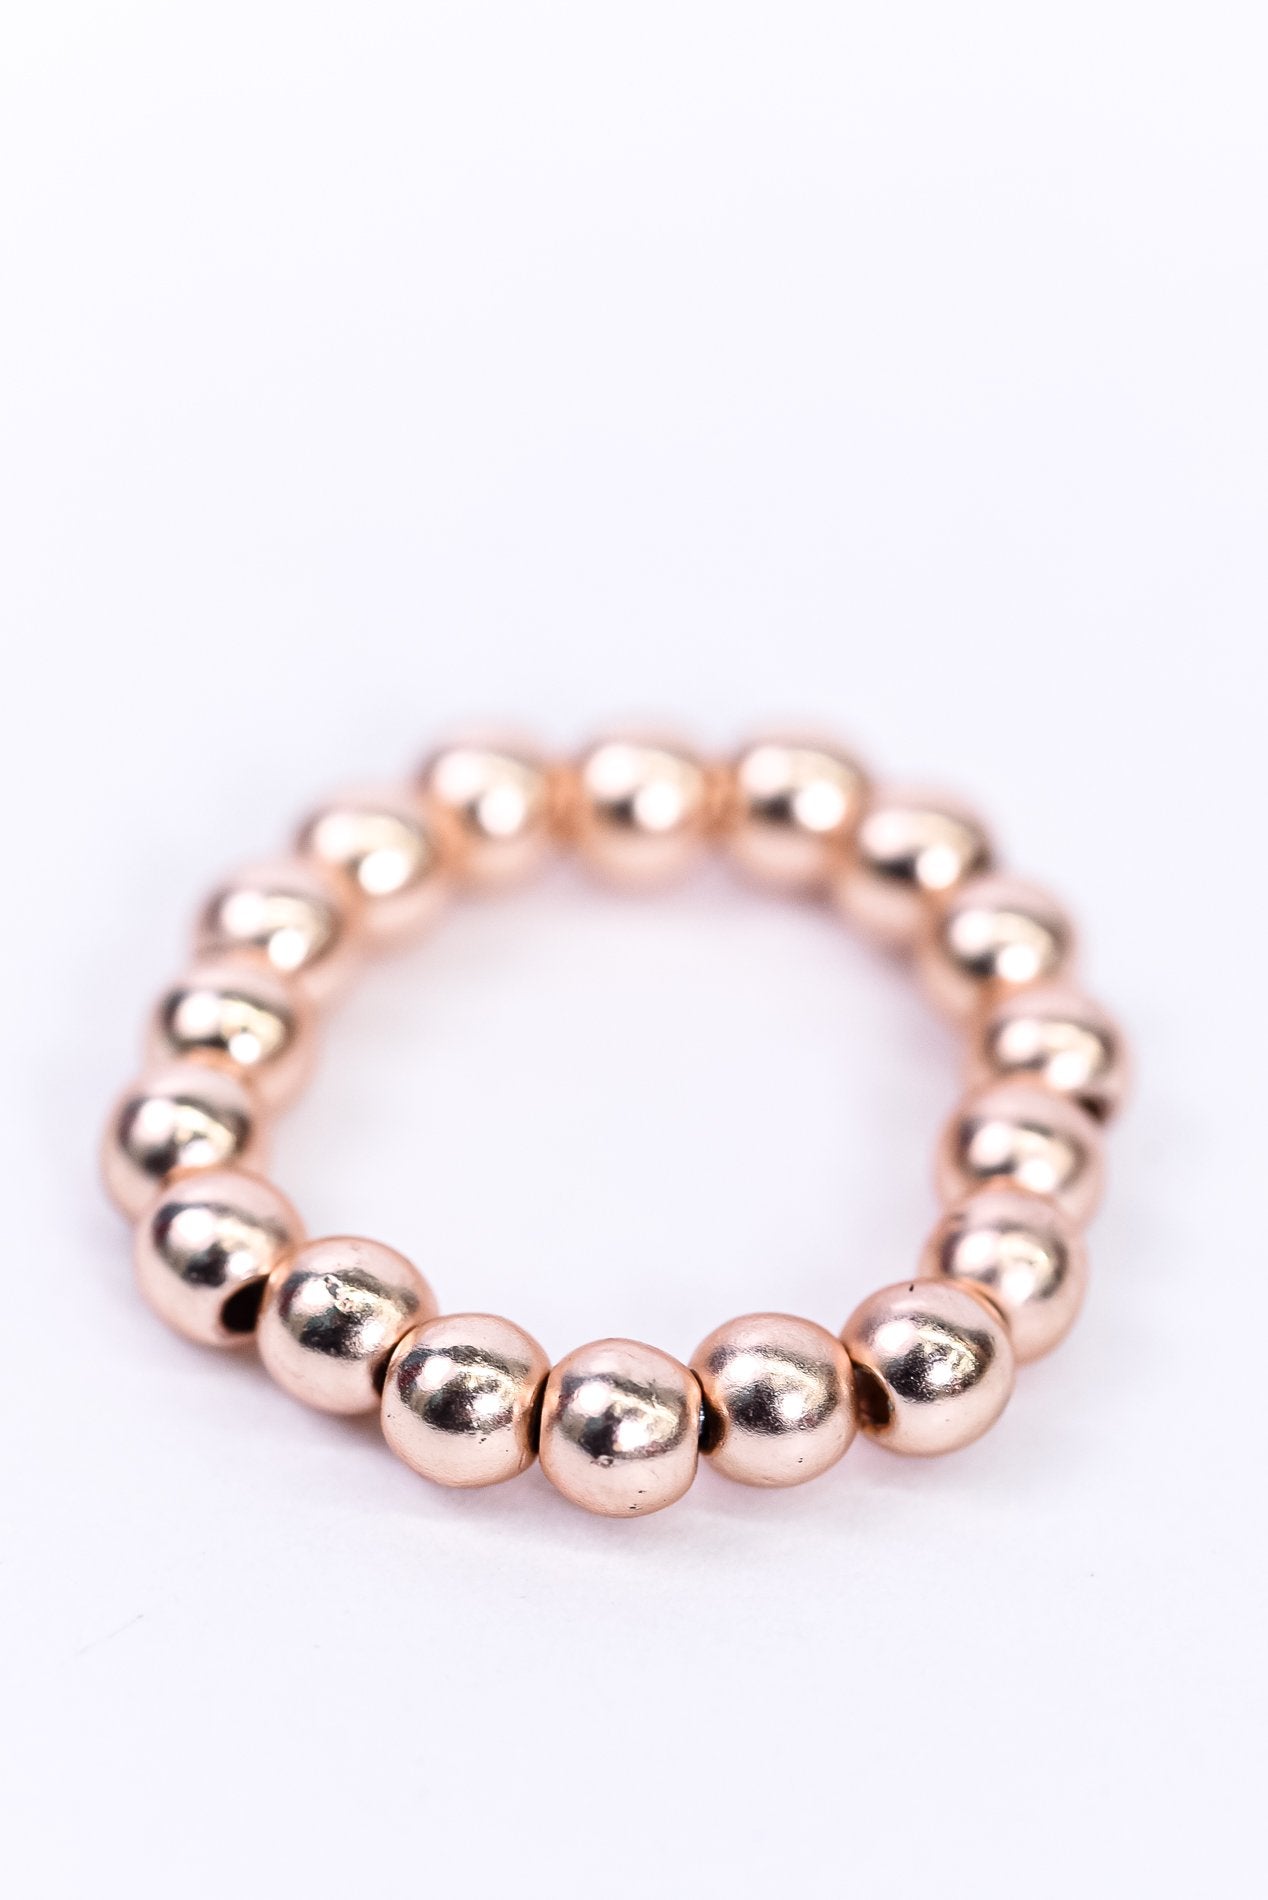 Gold/Silver/Rose Gold/Beaded/Stretch/6 Piece Ring Set - RNG1093MU